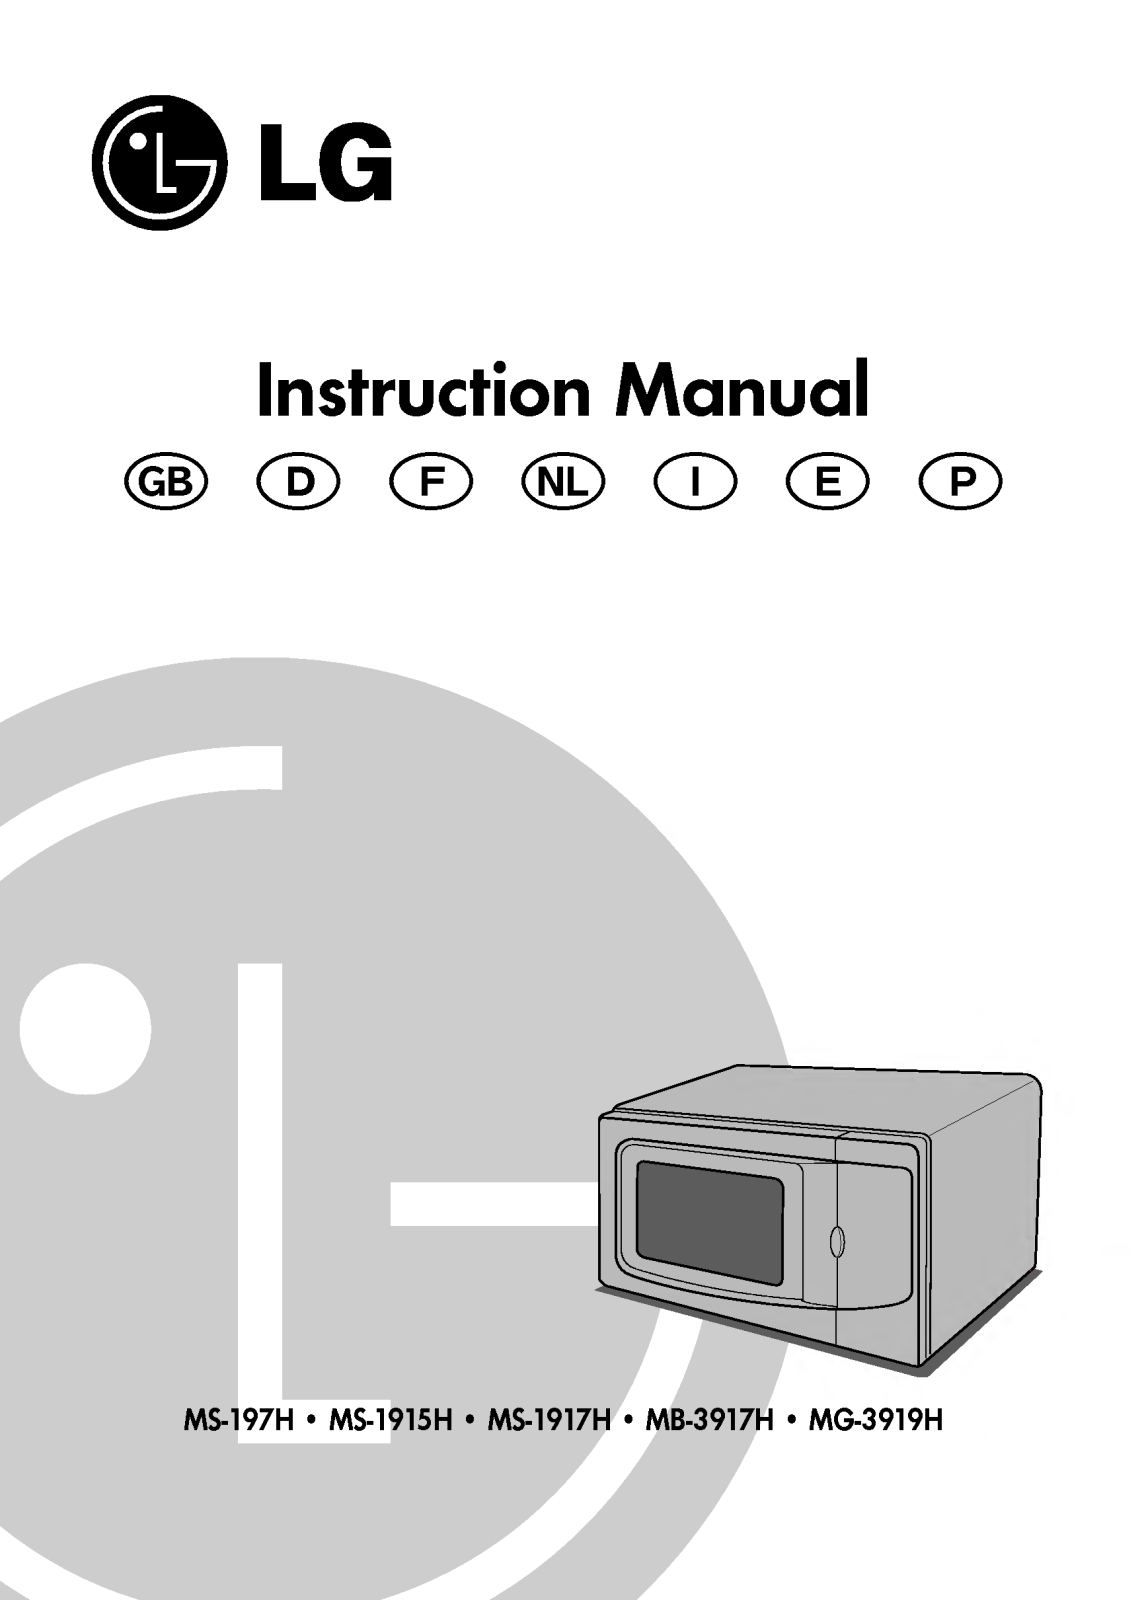 Lg MS-197H, MS-1915H, MS-1917H, MS-3917H, MS-3919H Instructions Manual